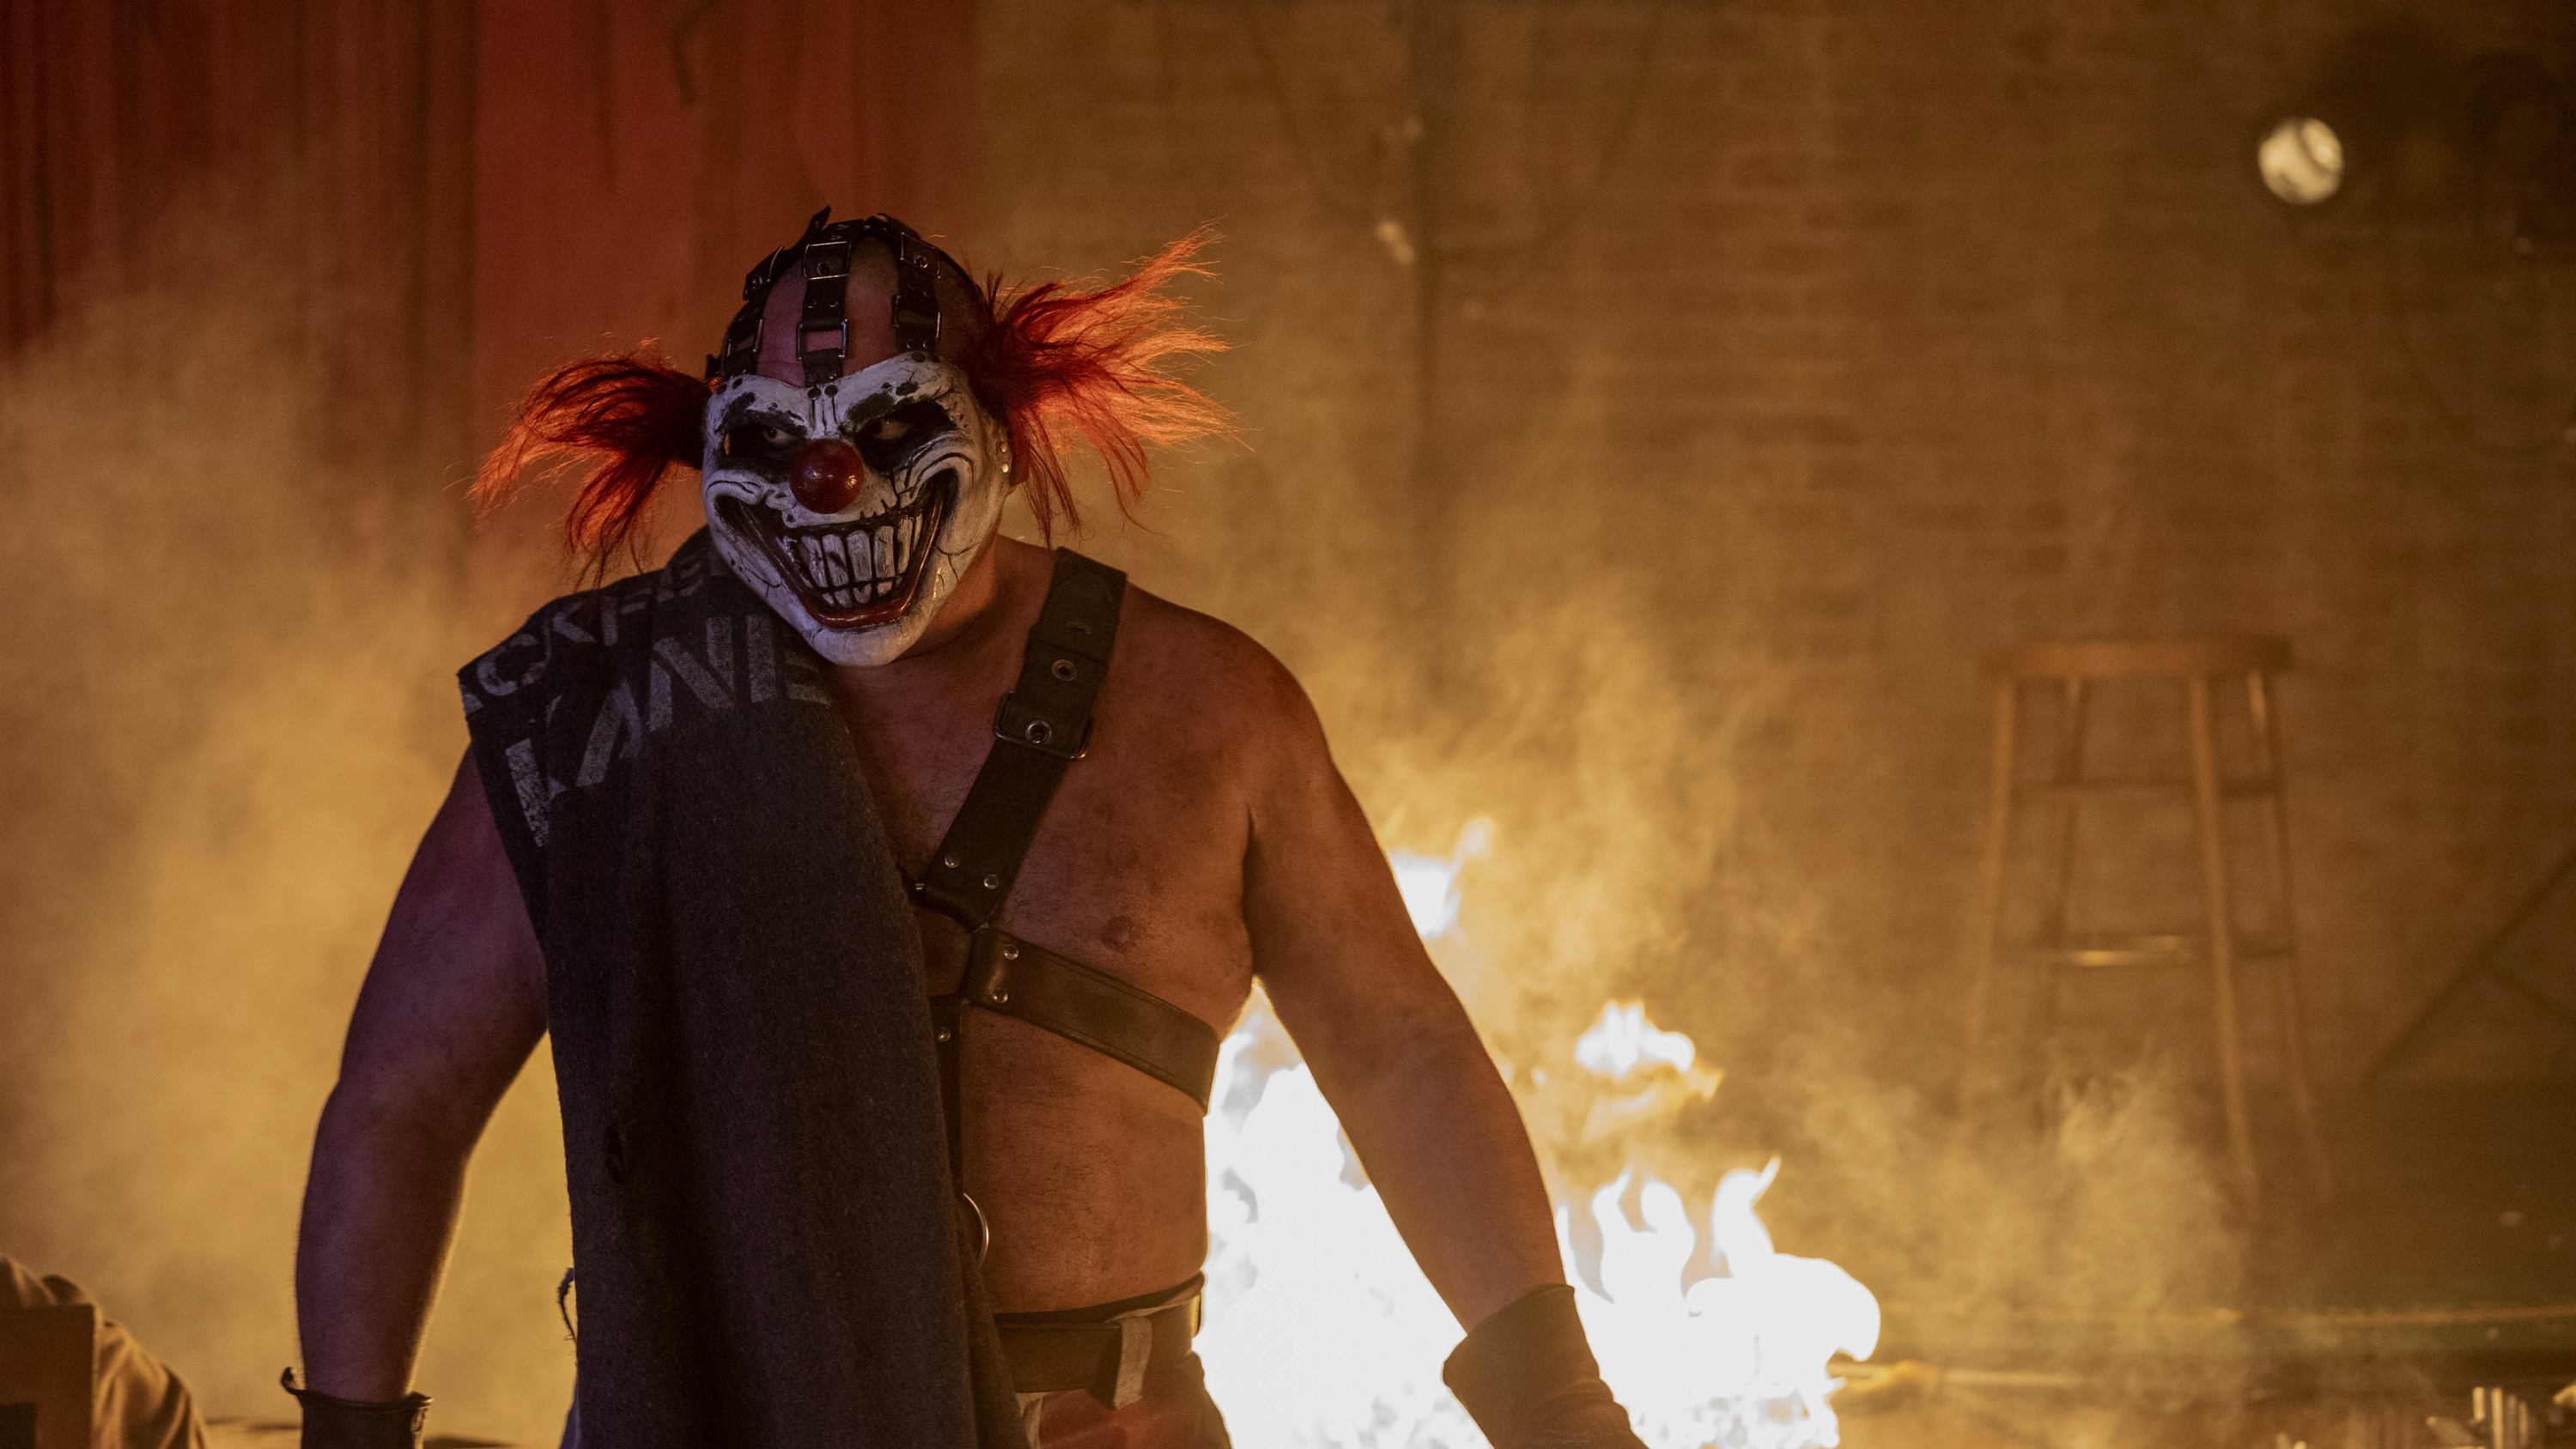 Person with a menacing clown mask and costume stands in front of flames on a stage